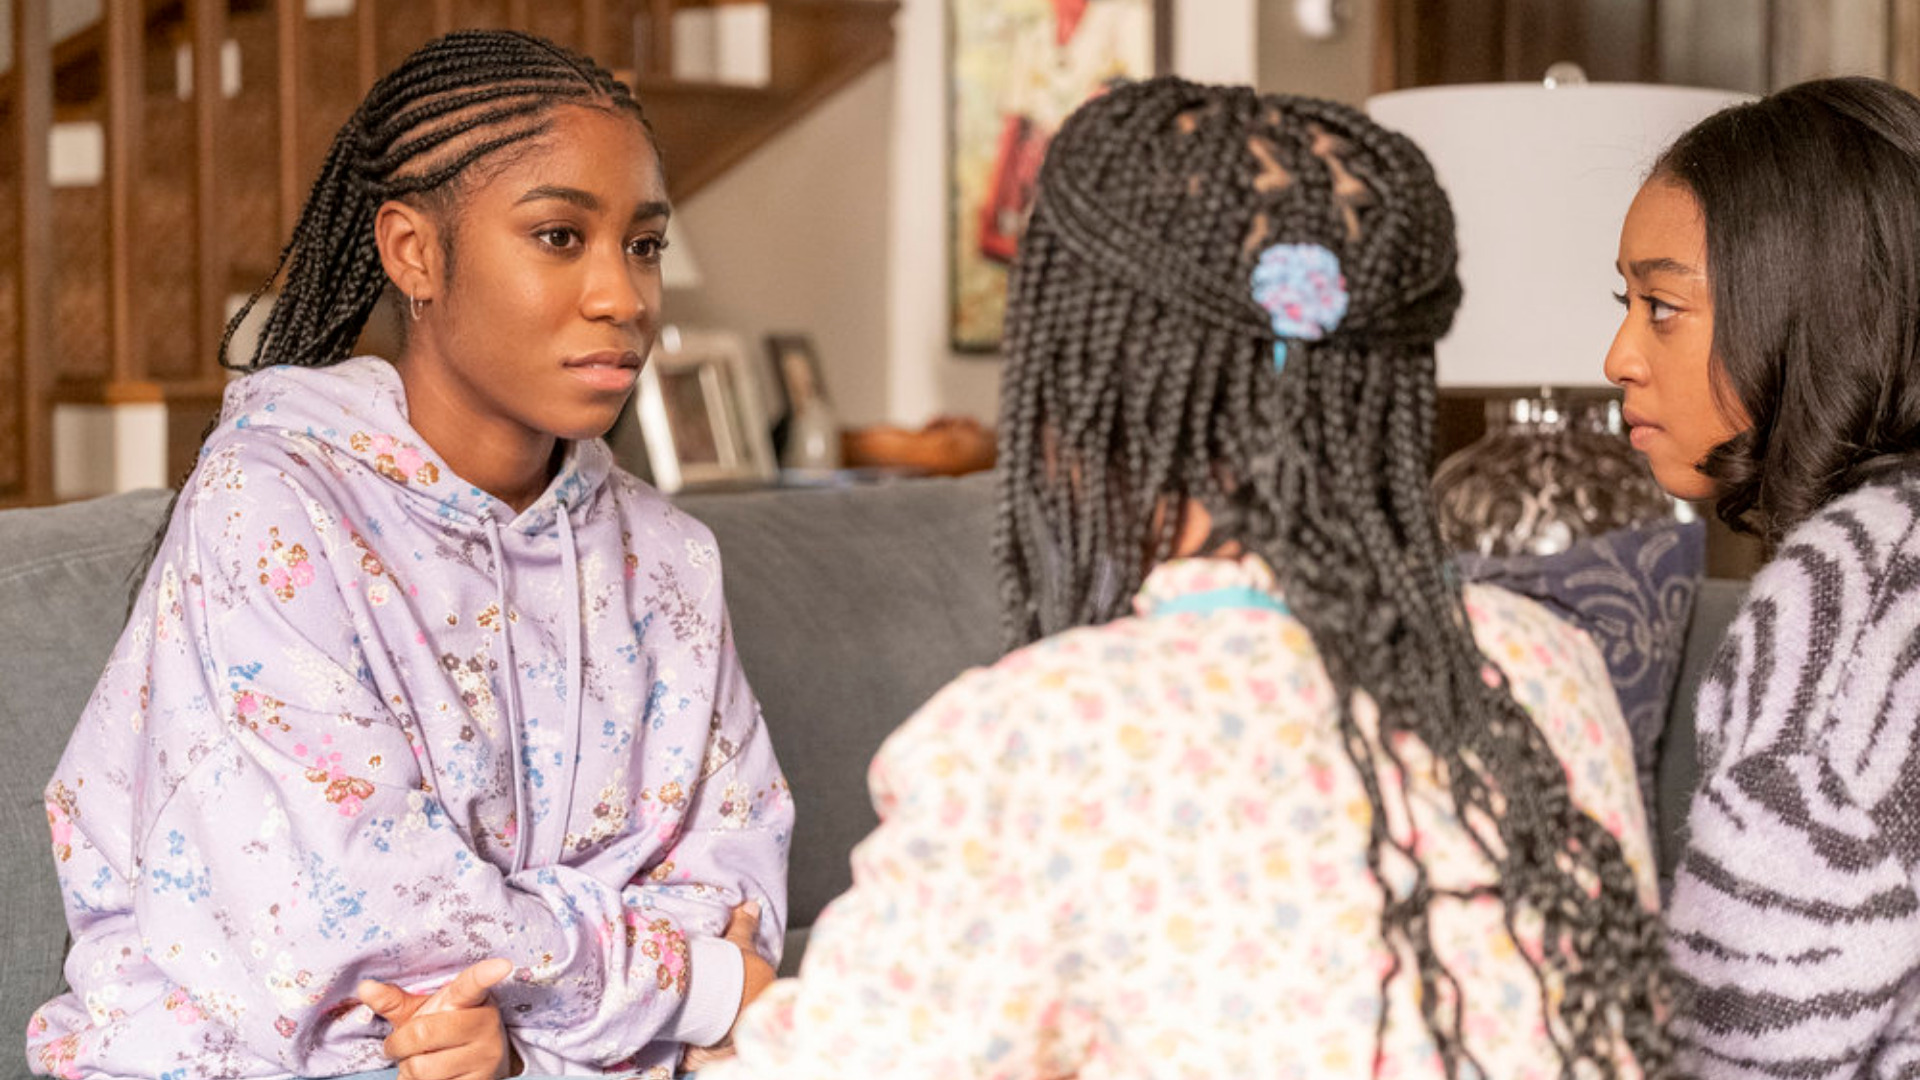 Lyric Ross as Deja talks to Eris Baker as Tess and Faithe Herman as Annie in ‘This Is Us’ Season 6 Episode 5